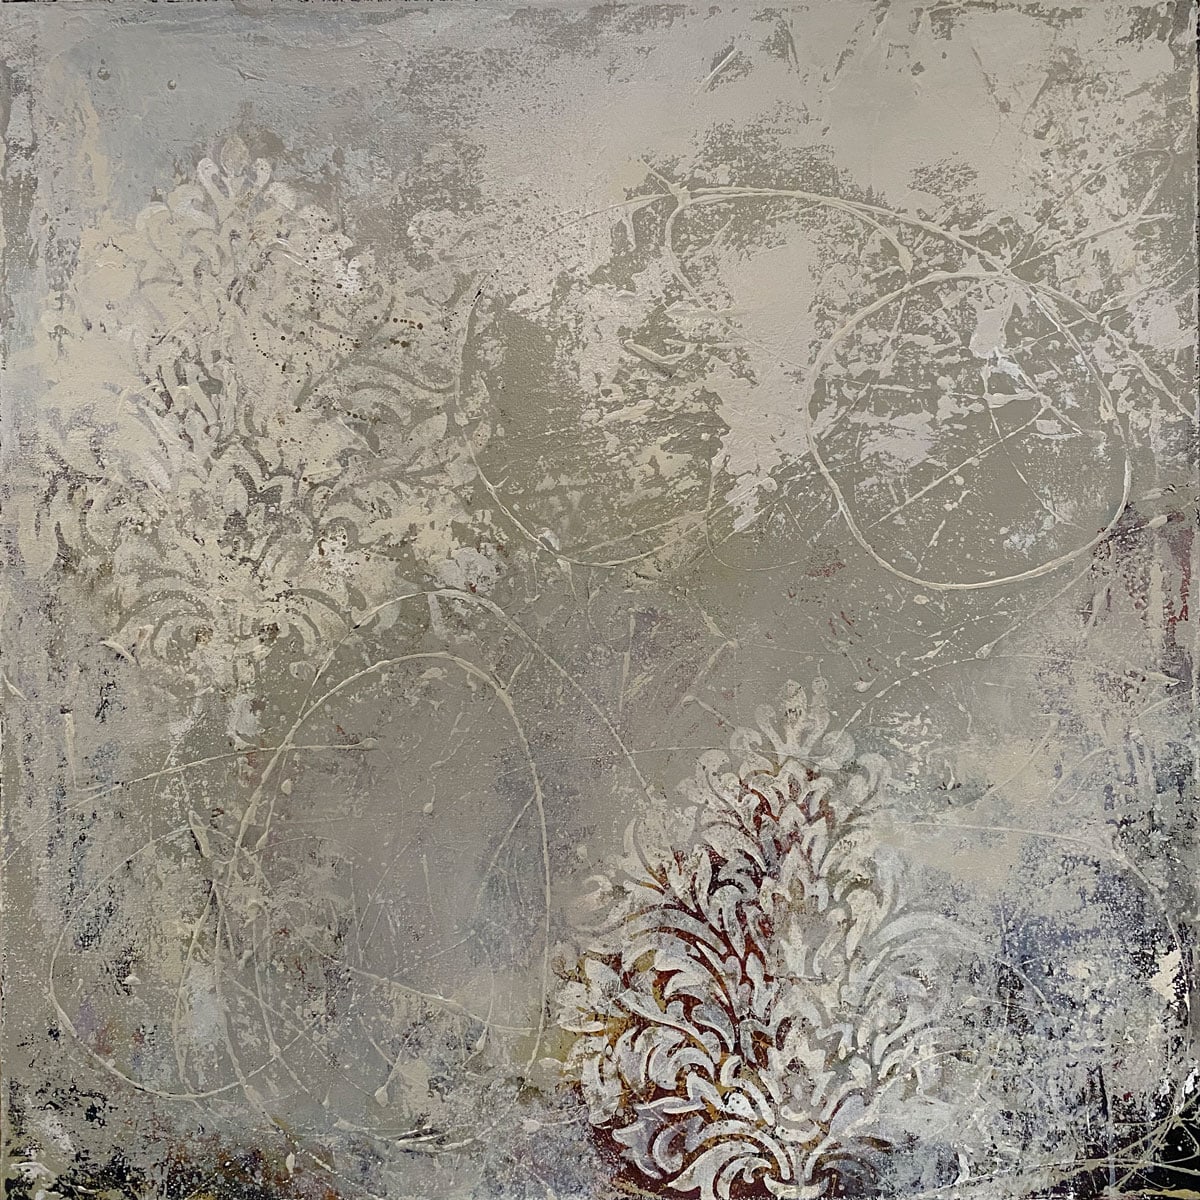 Tangled by Julie Anna Lewis  Image: Tangled, 36"x36"